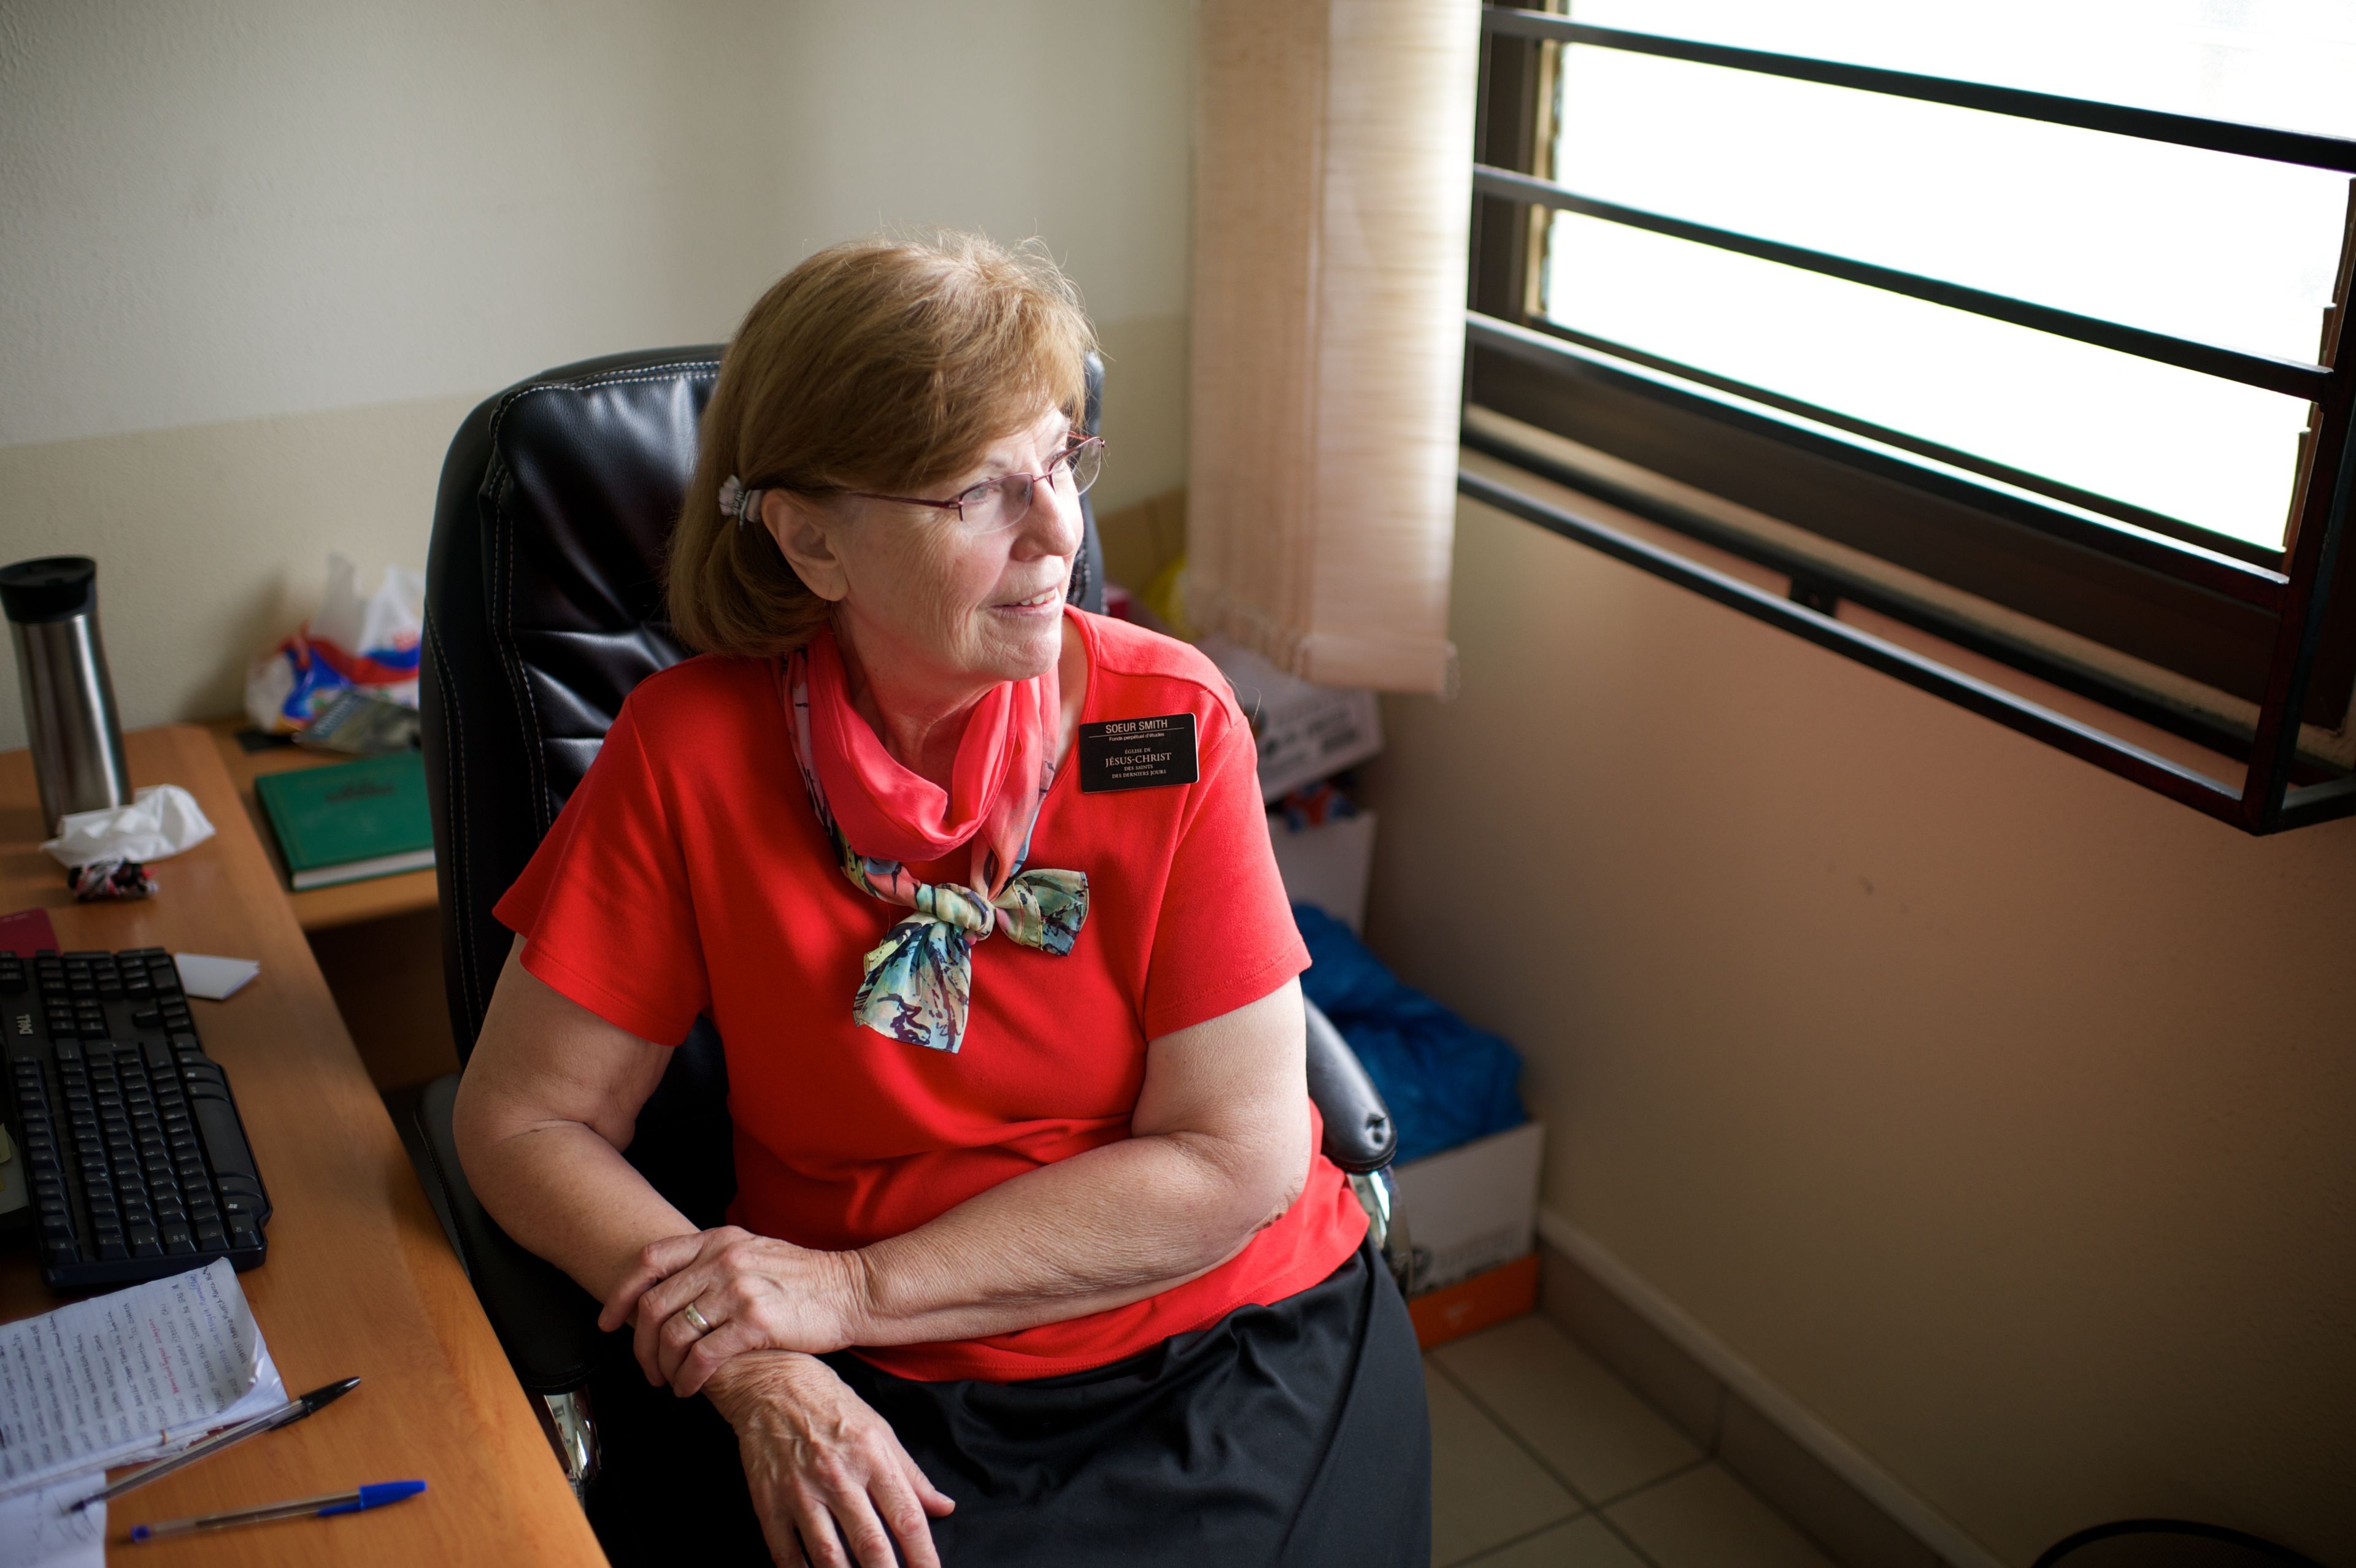 A senior sister missionary sitting at a desk and looking out a window.